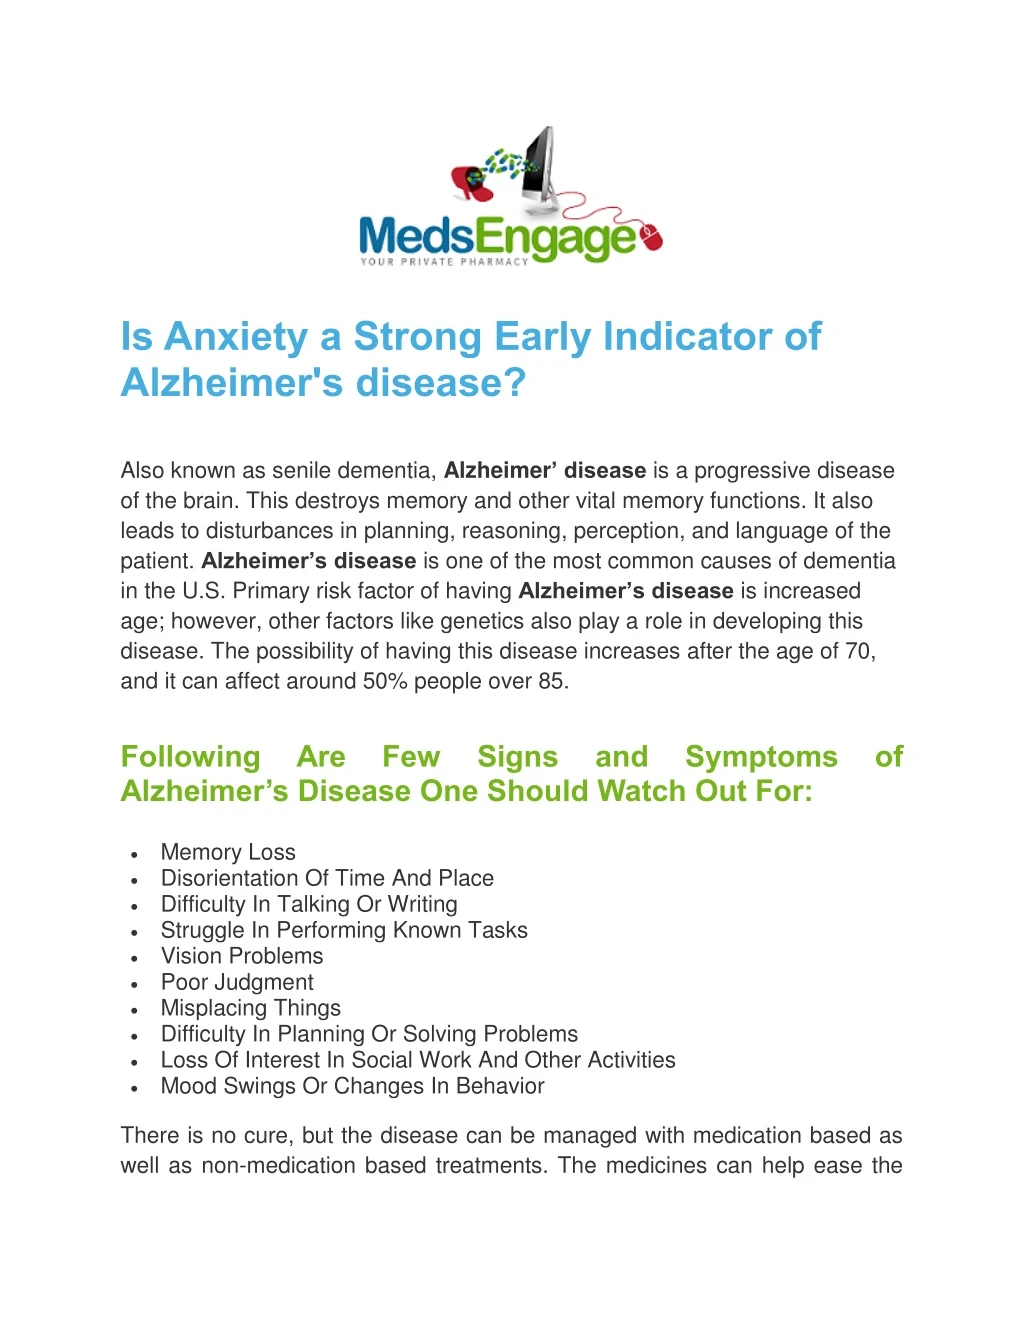 is anxiety a strong early indicator of alzheimer